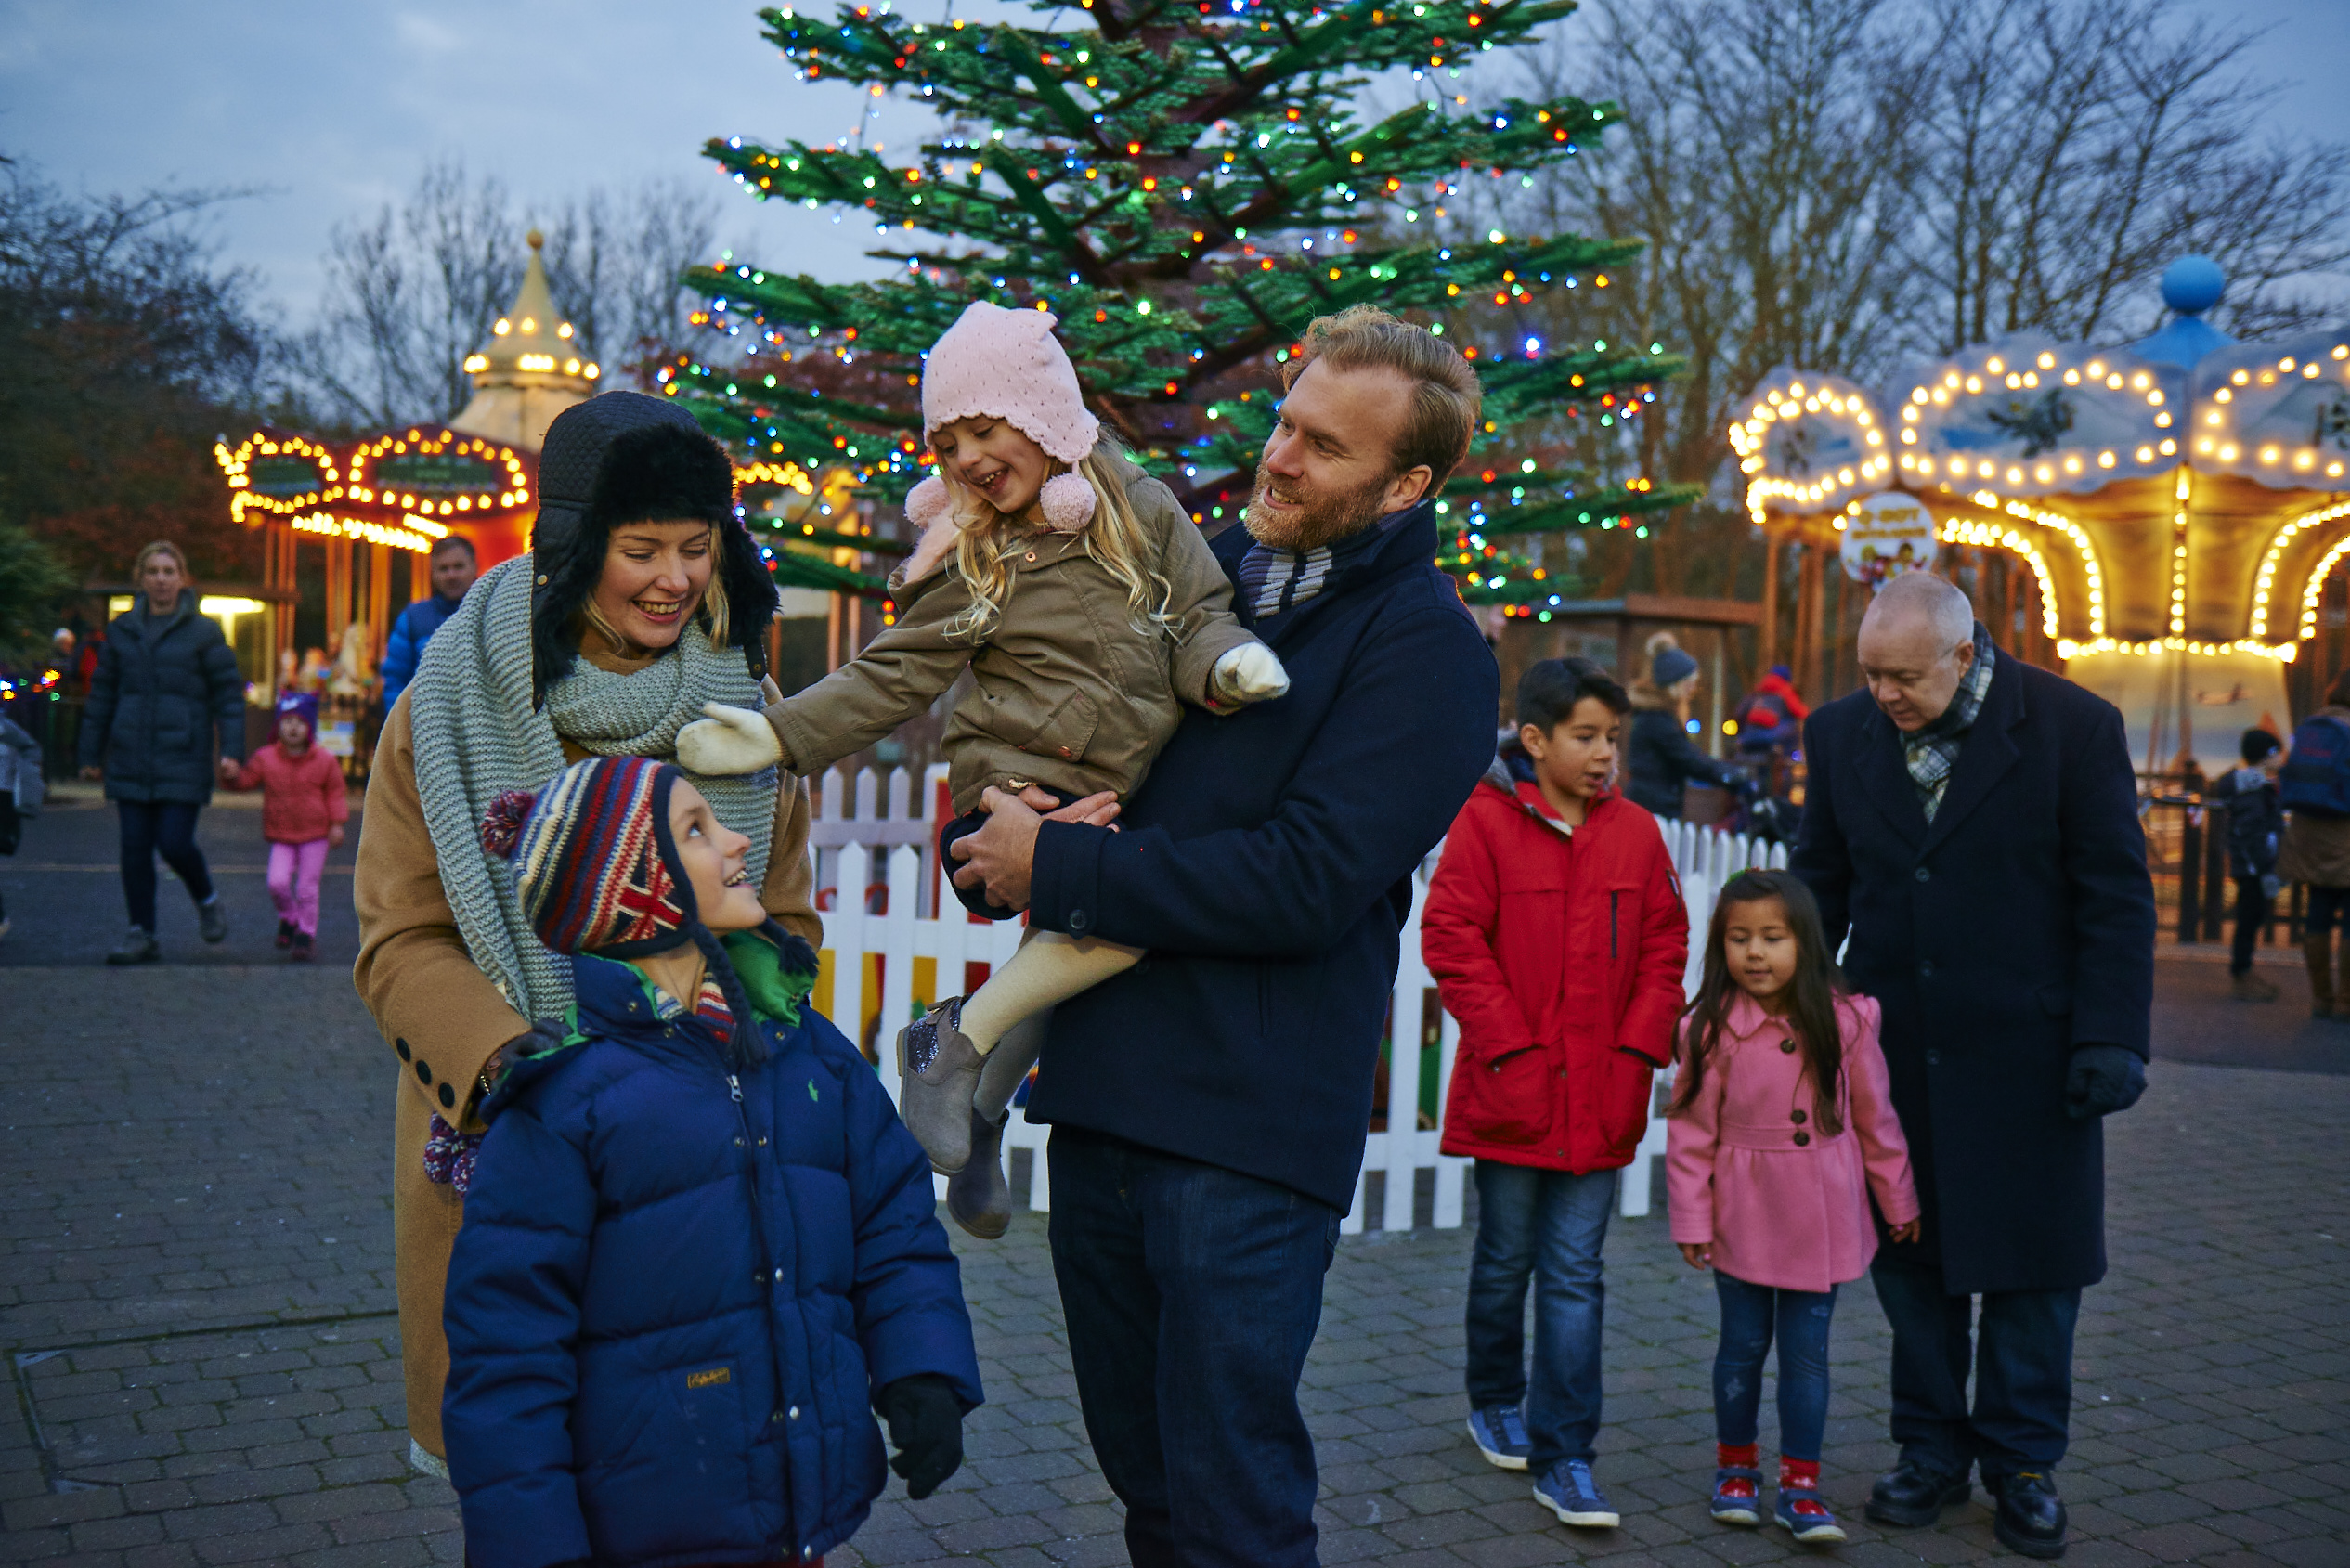 Families in front of Christmas lights at LEGOLAND at Christmas at the LEGOLAND Windsor Resort